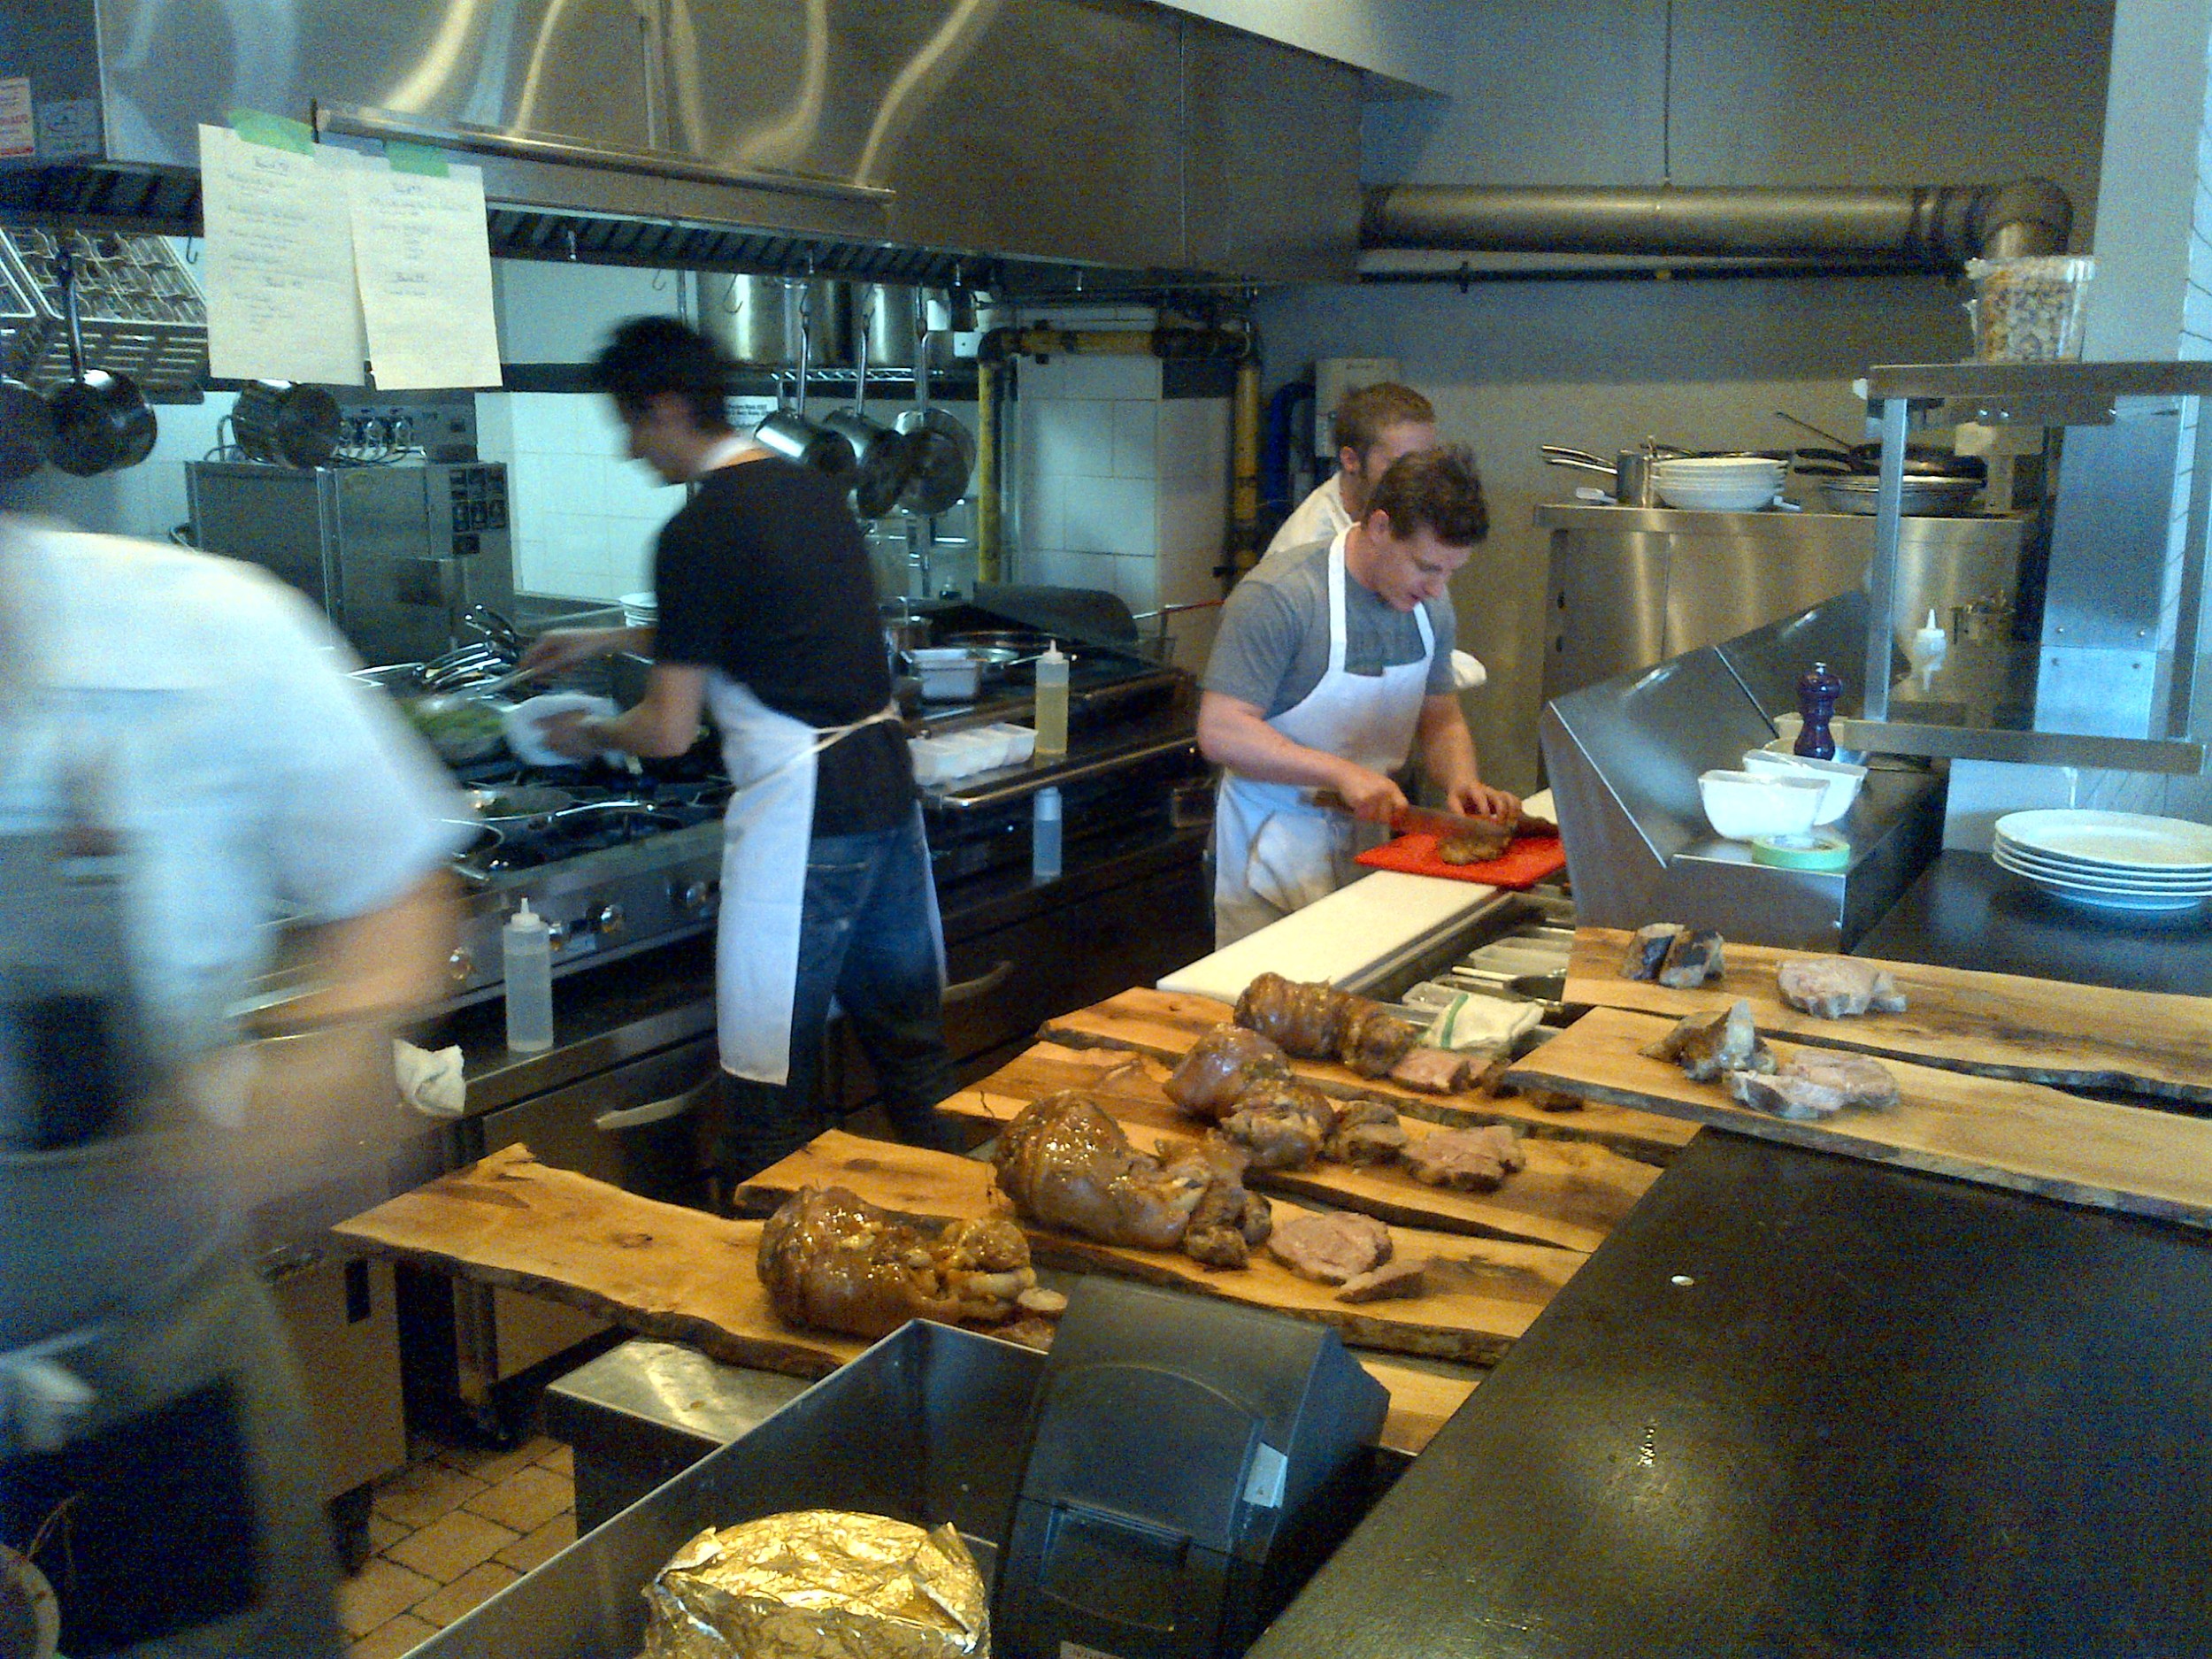  Steve Wall and his team at Supply and Demand plating (or wooding?) the pork on long wood planks for sharing plates.​ 